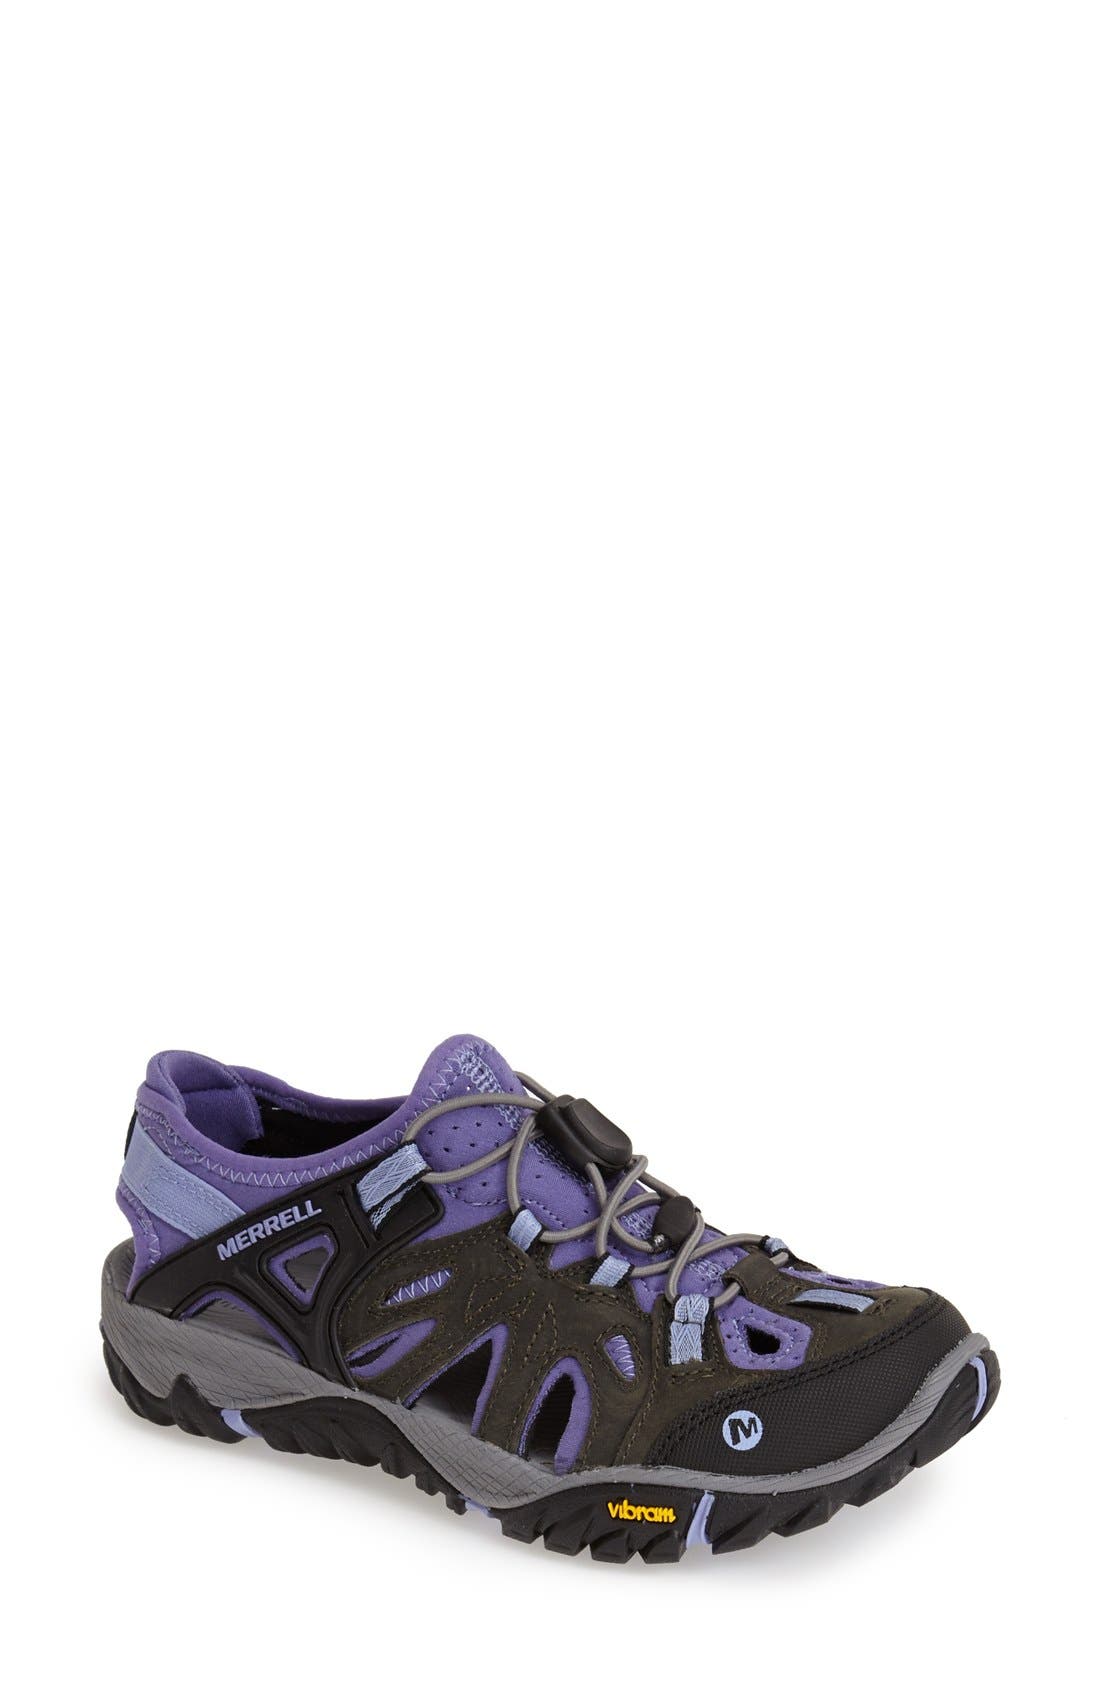 merrell all out blaze stretch